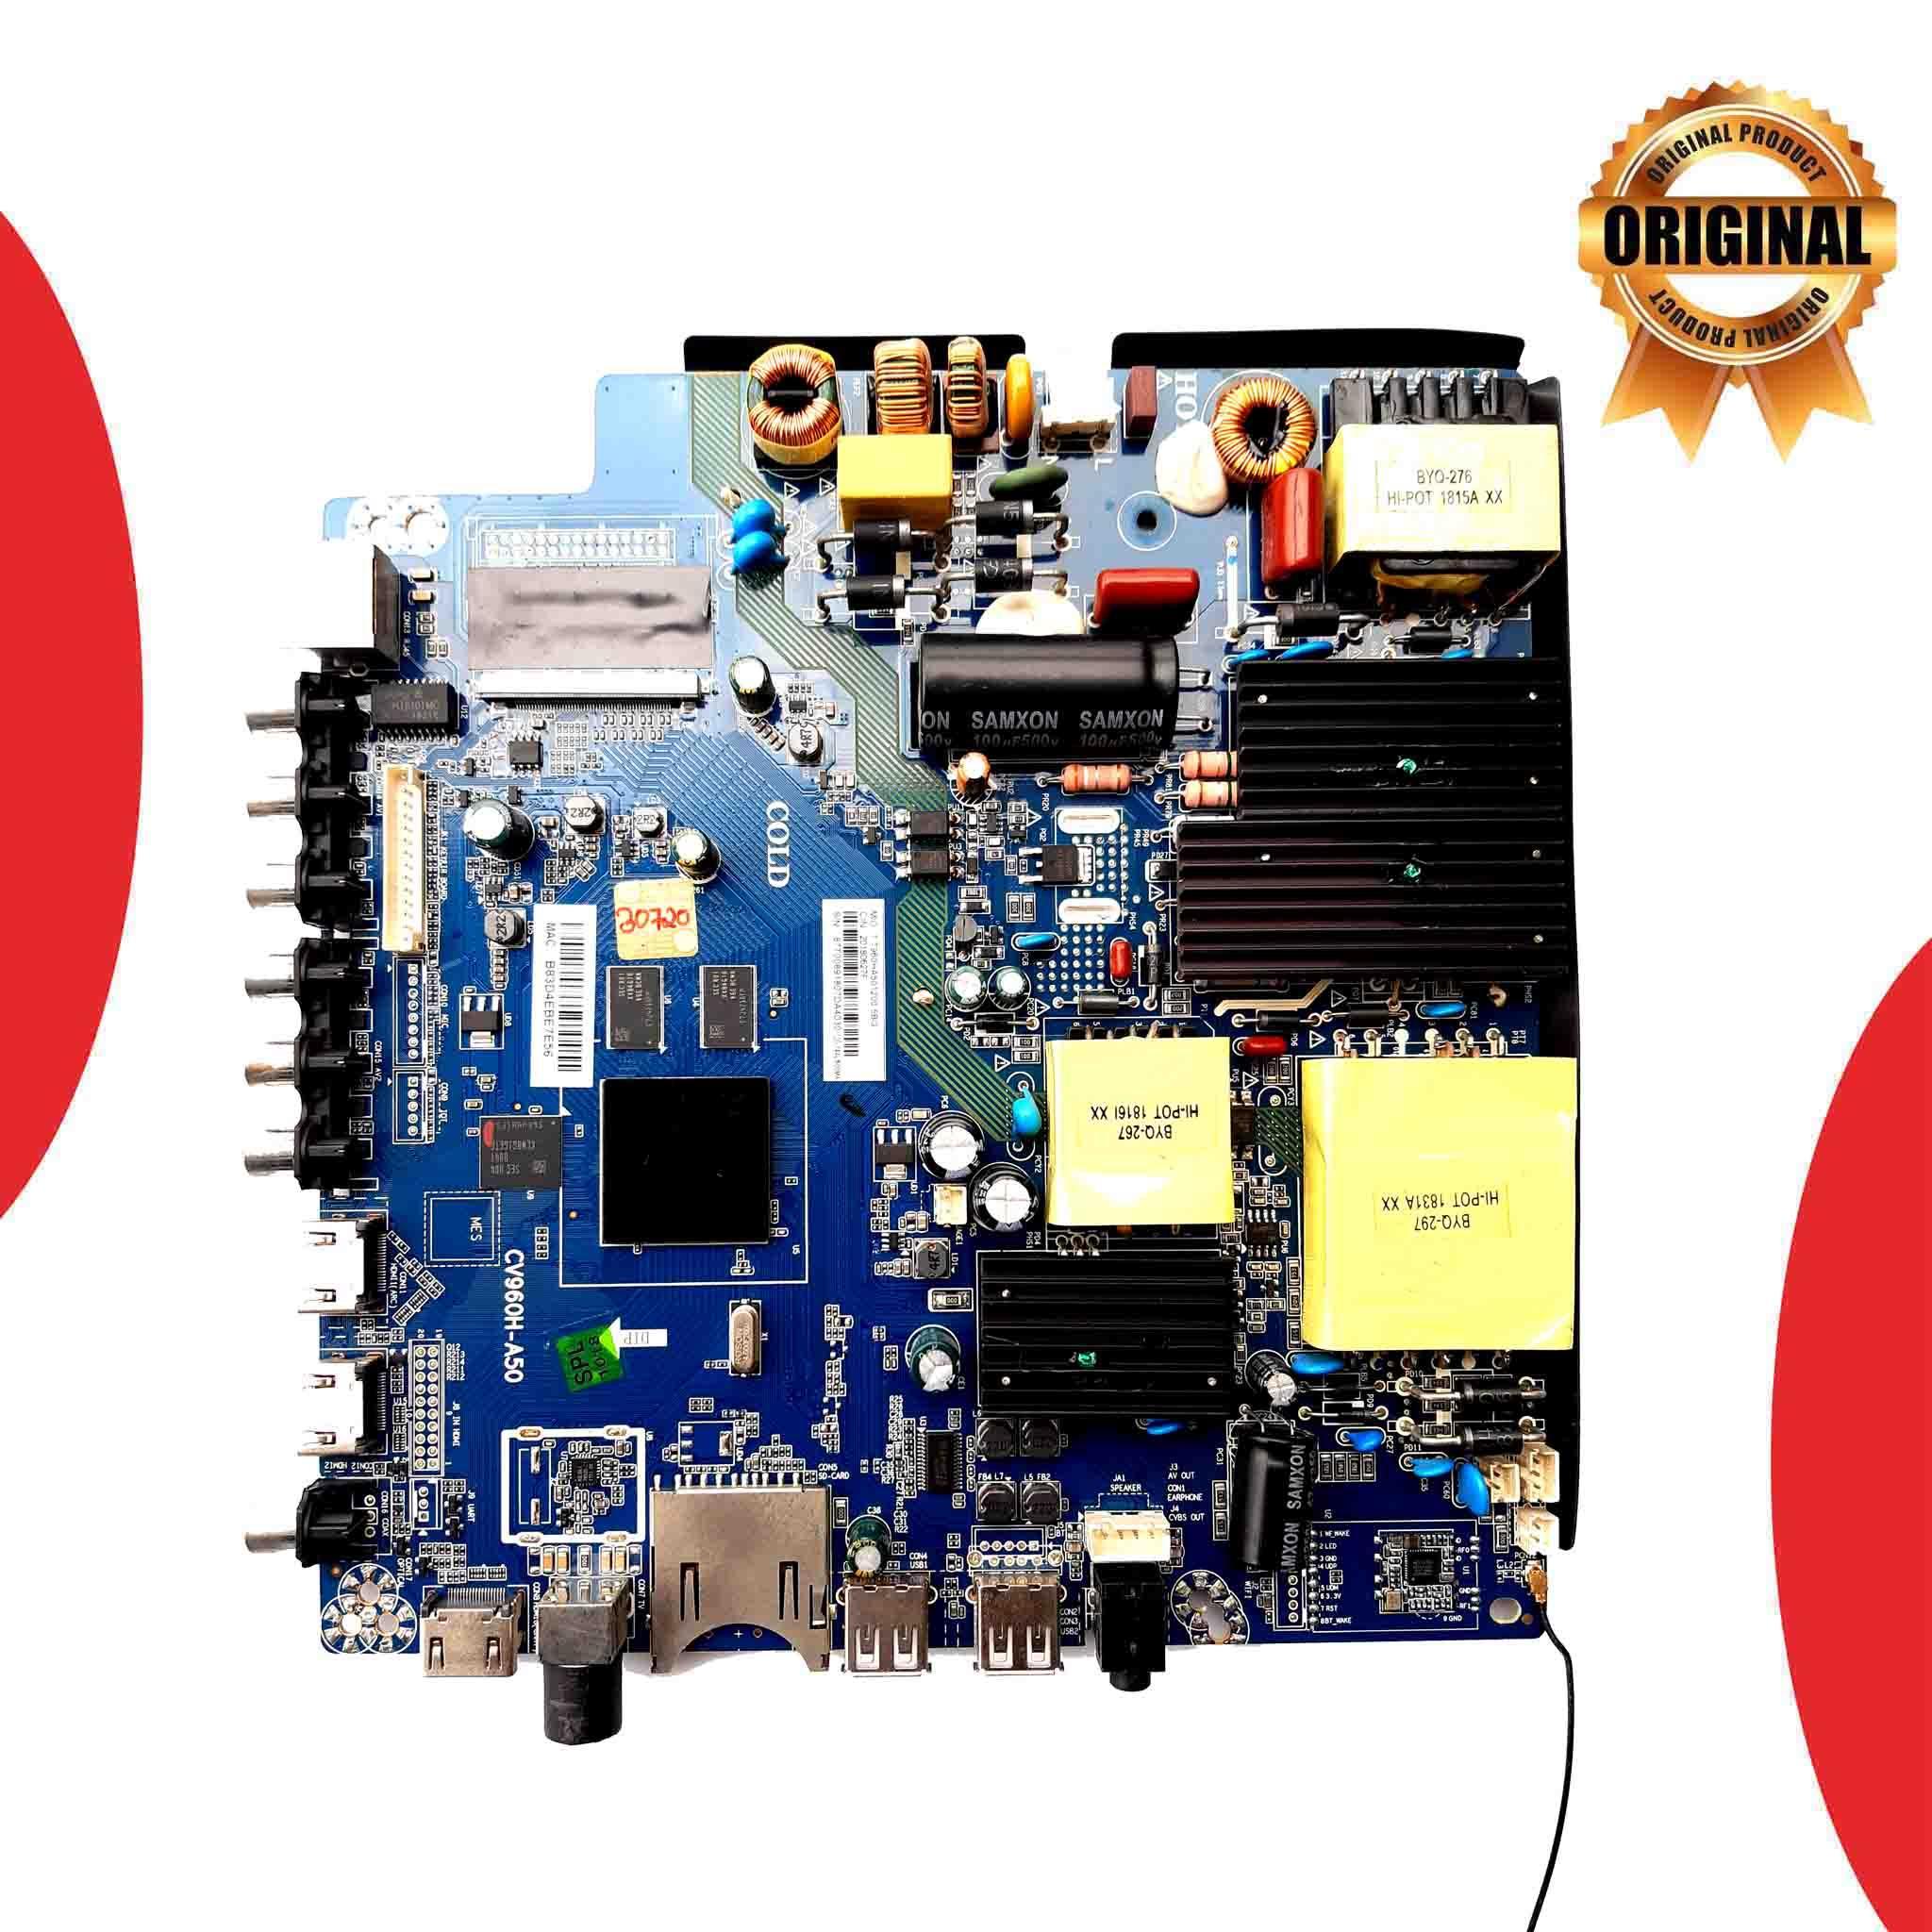 Model 55TH1000 Thomson LED TV Motherboard - Great Bharat Electronics